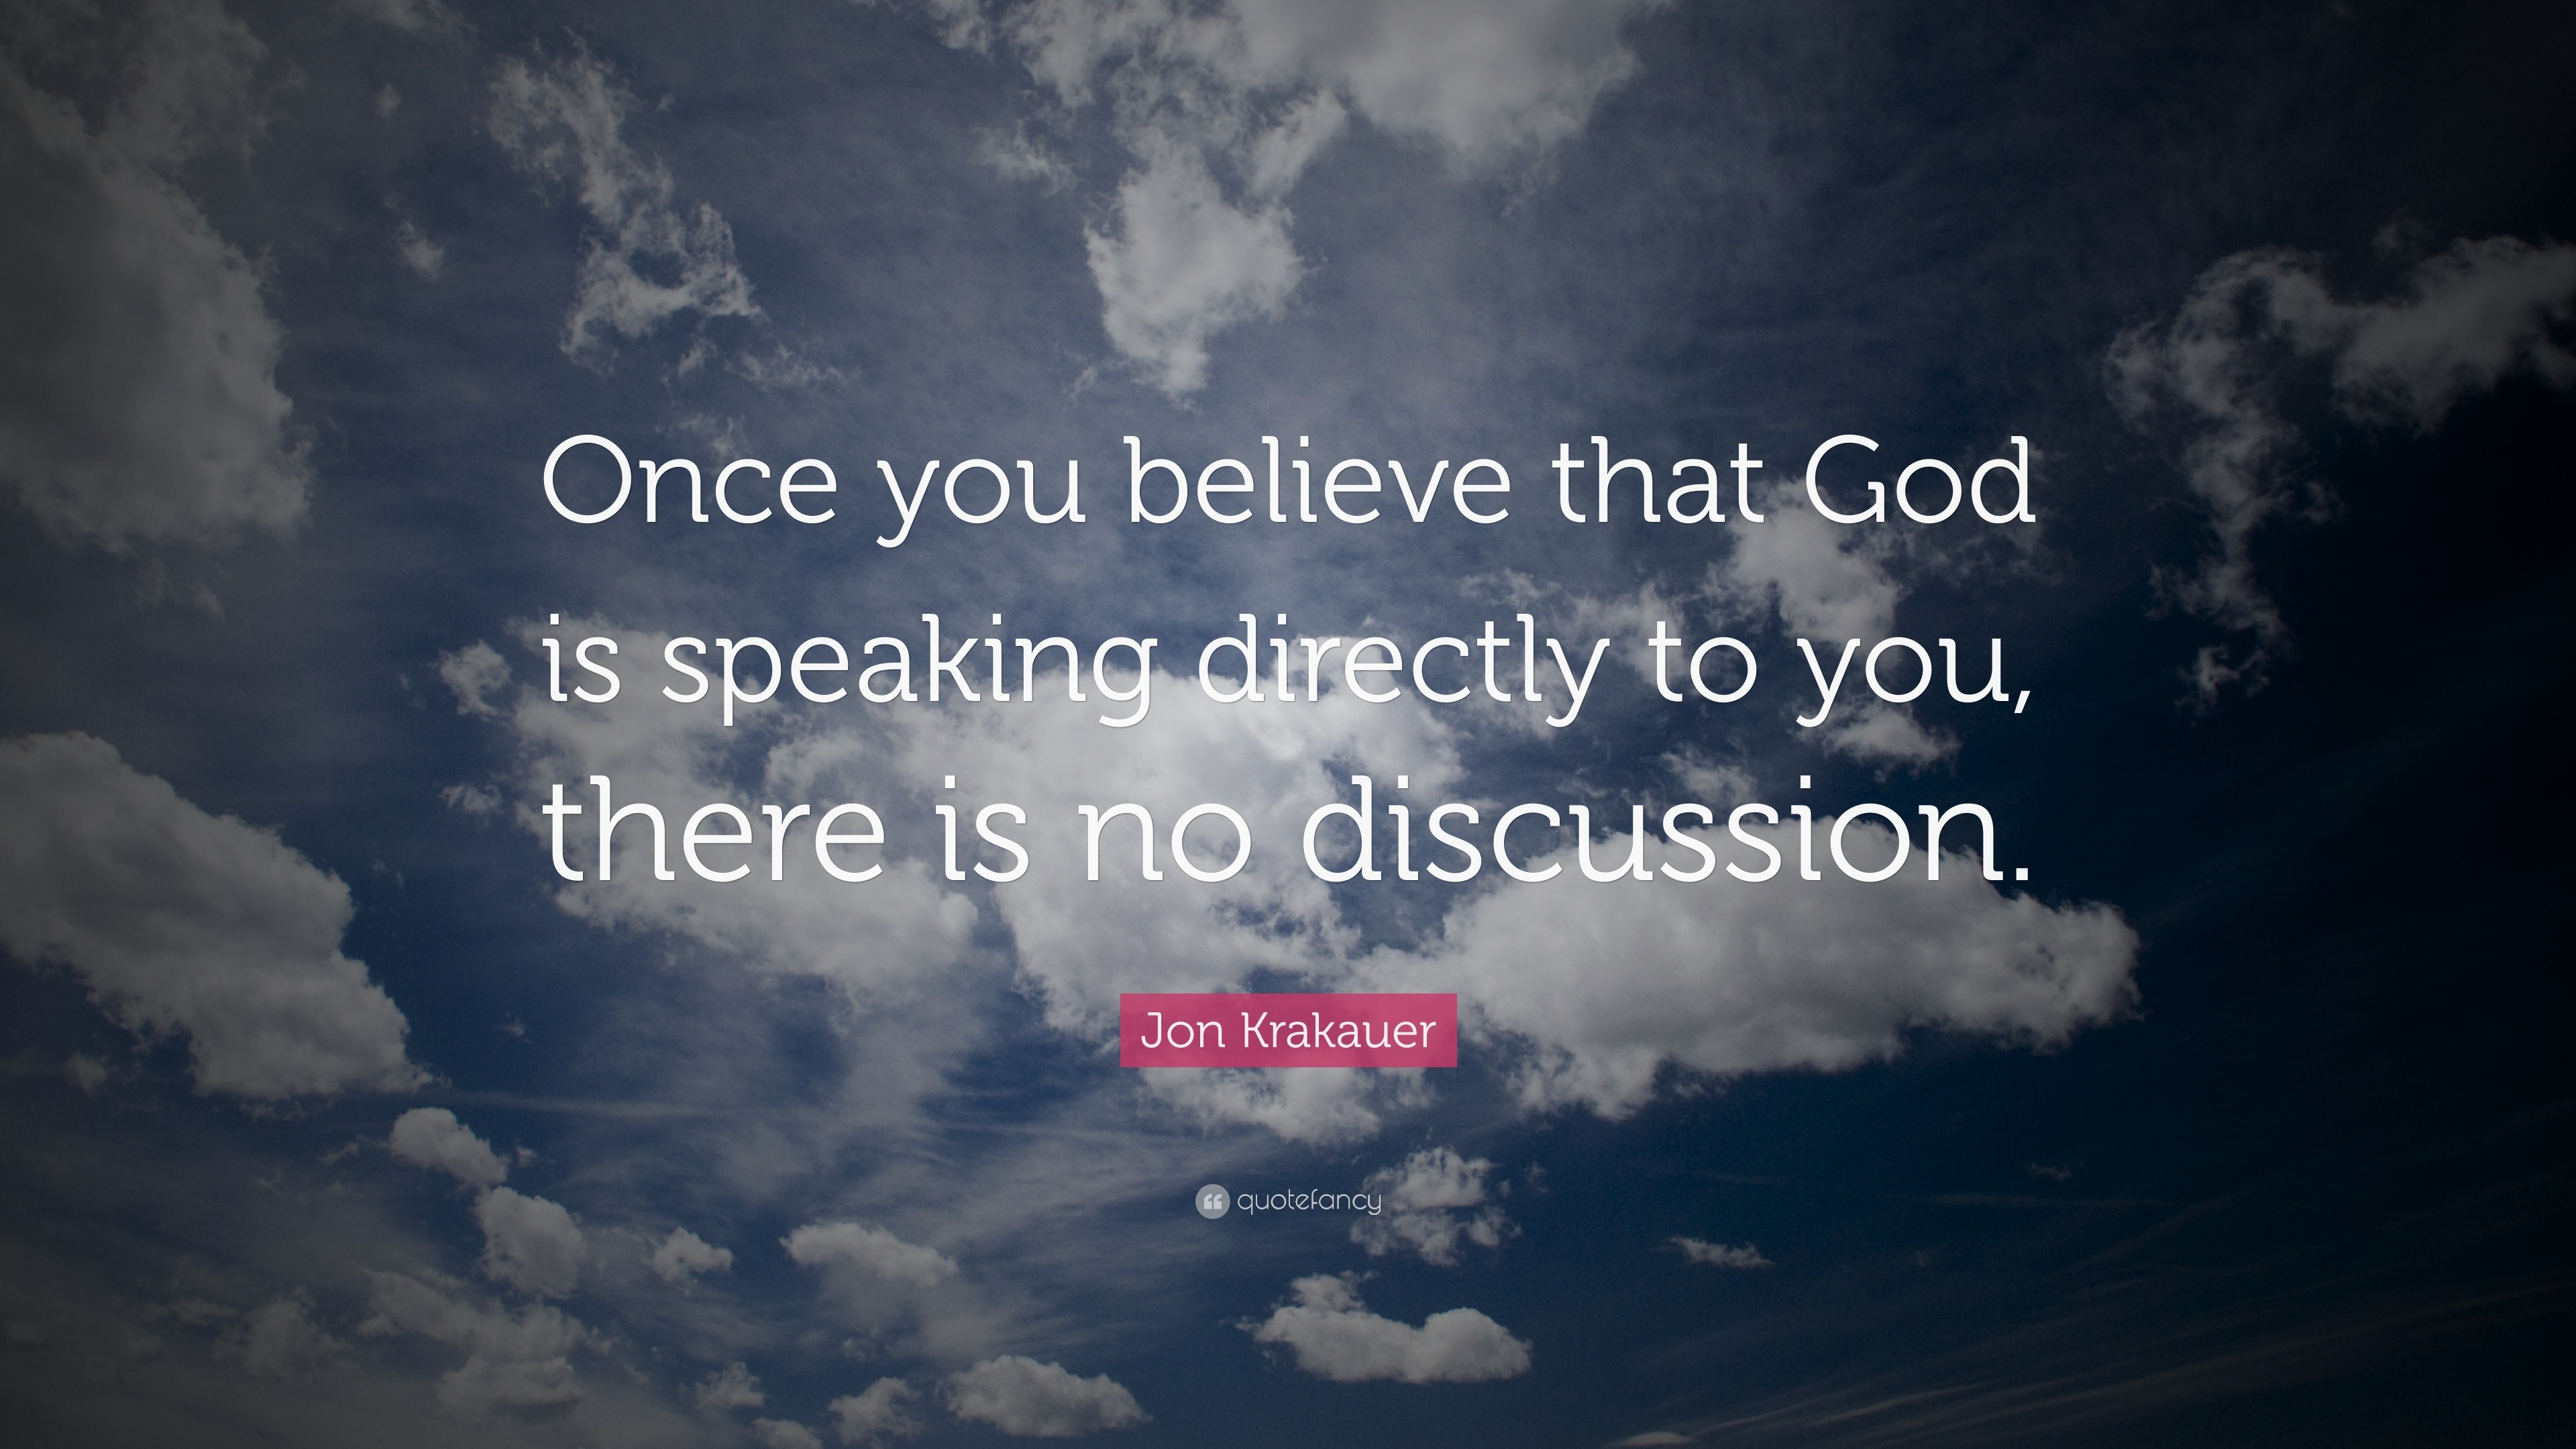 3840x2160 Jon Krakauer Quote: “Once you believe that God is speaking directly to you,